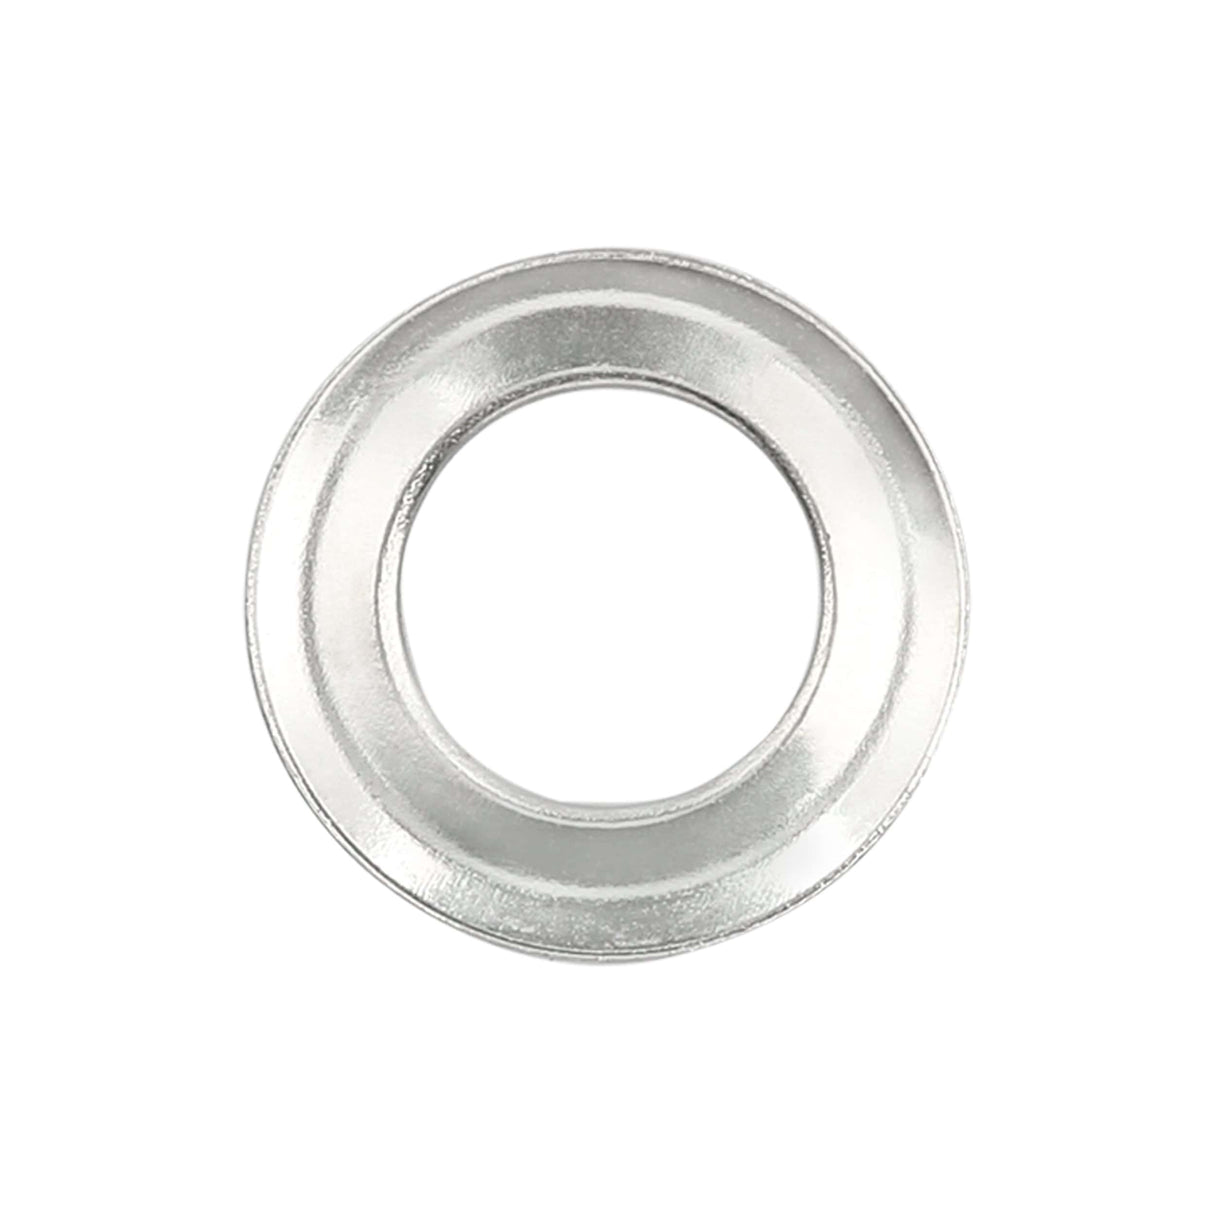 Ohio Travel Bag Fasteners 19/64" Nickel, Washer, Steel - 36 pk, #A-402-NP A-402-NP